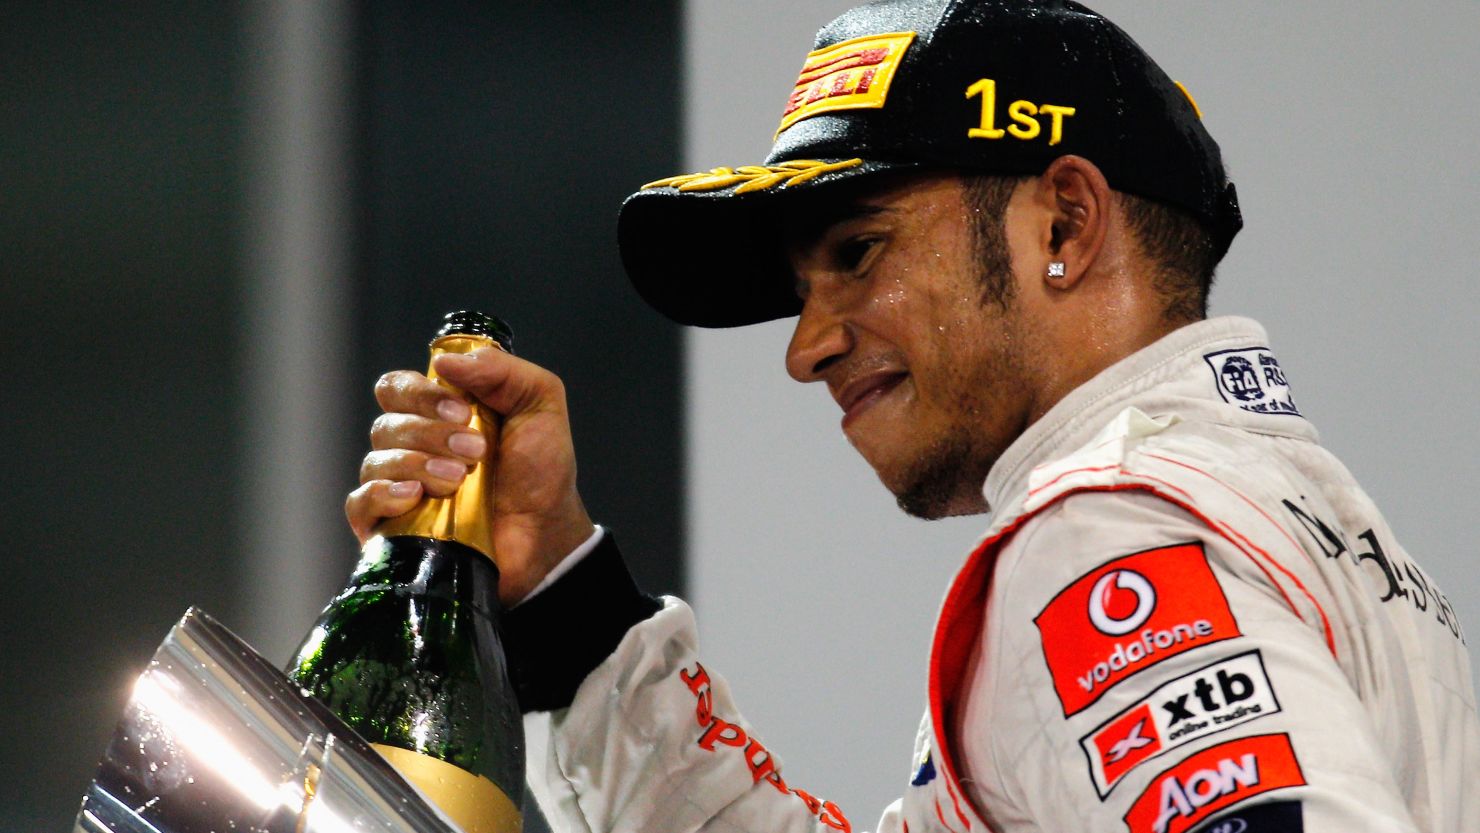 Lewis Hamilton's victory in Abu Dhabi was only his third in the 2011 Formula One season.